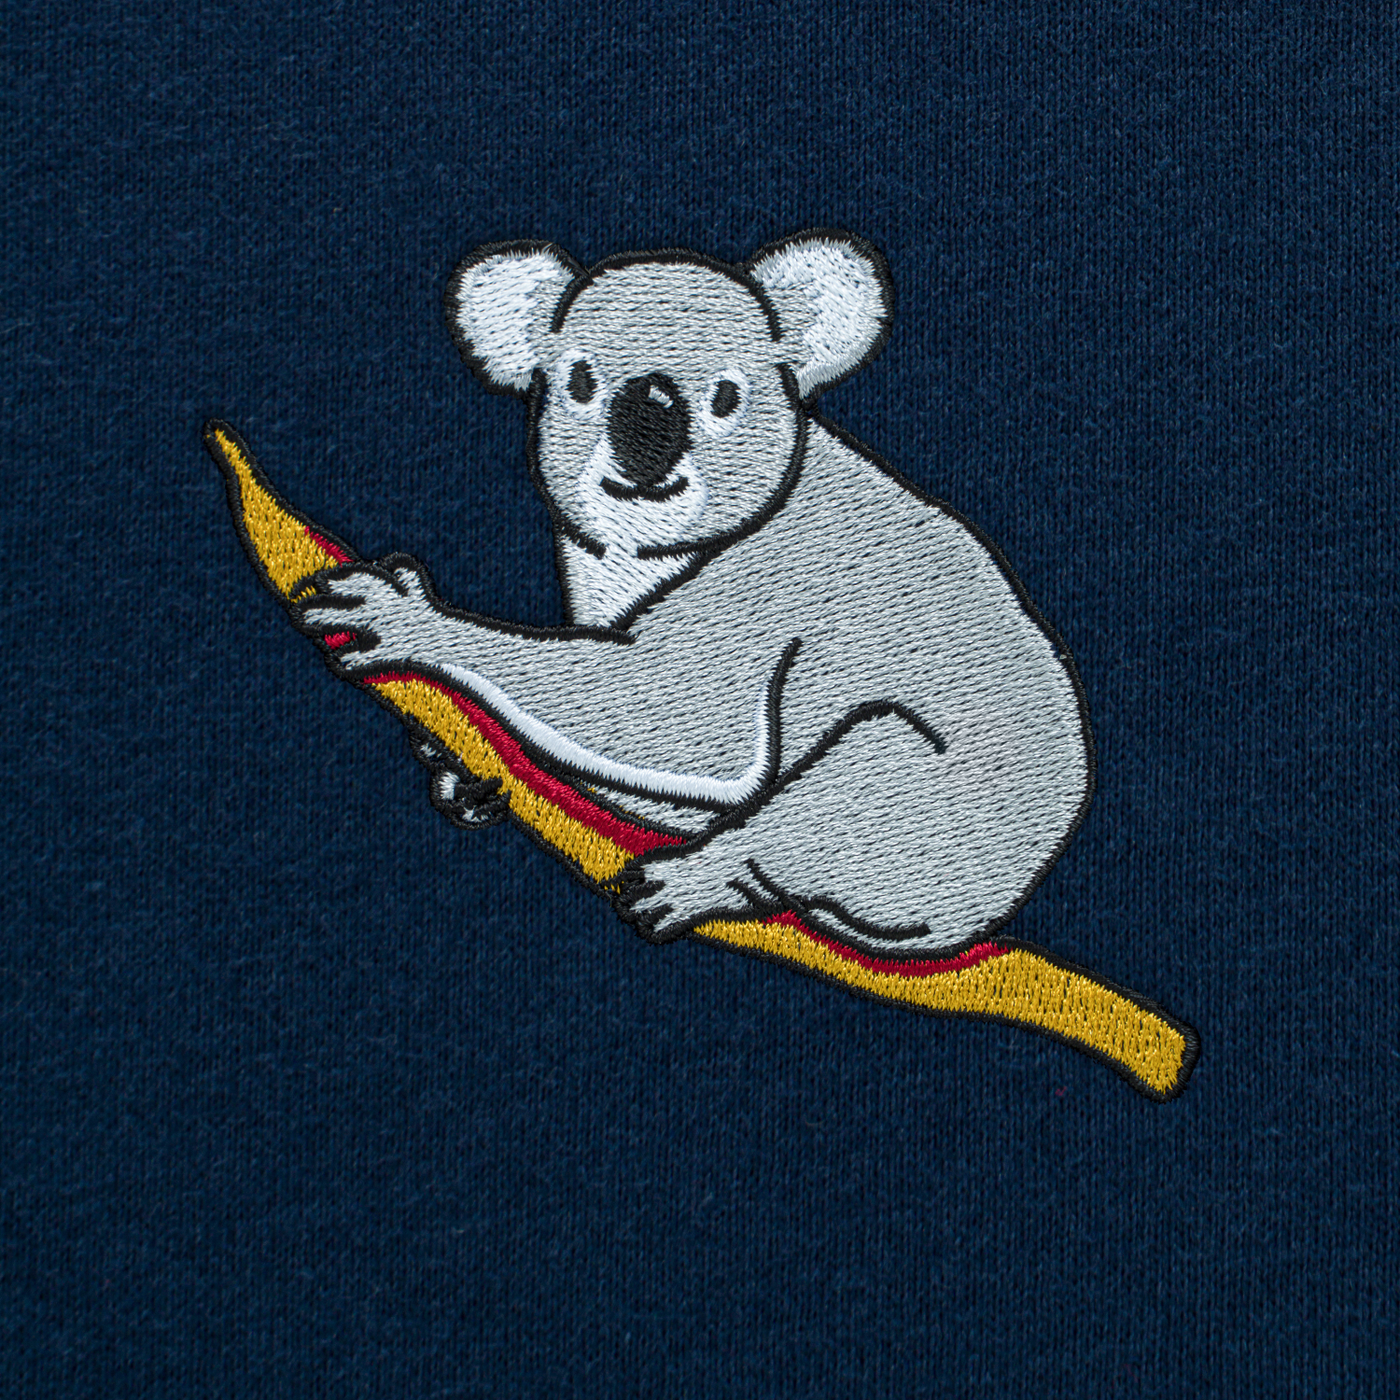 Bobby's Planet Women's Embroidered Koala Long Sleeve Shirt from Australia Down Under Animals Collection in Navy Color#color_navy